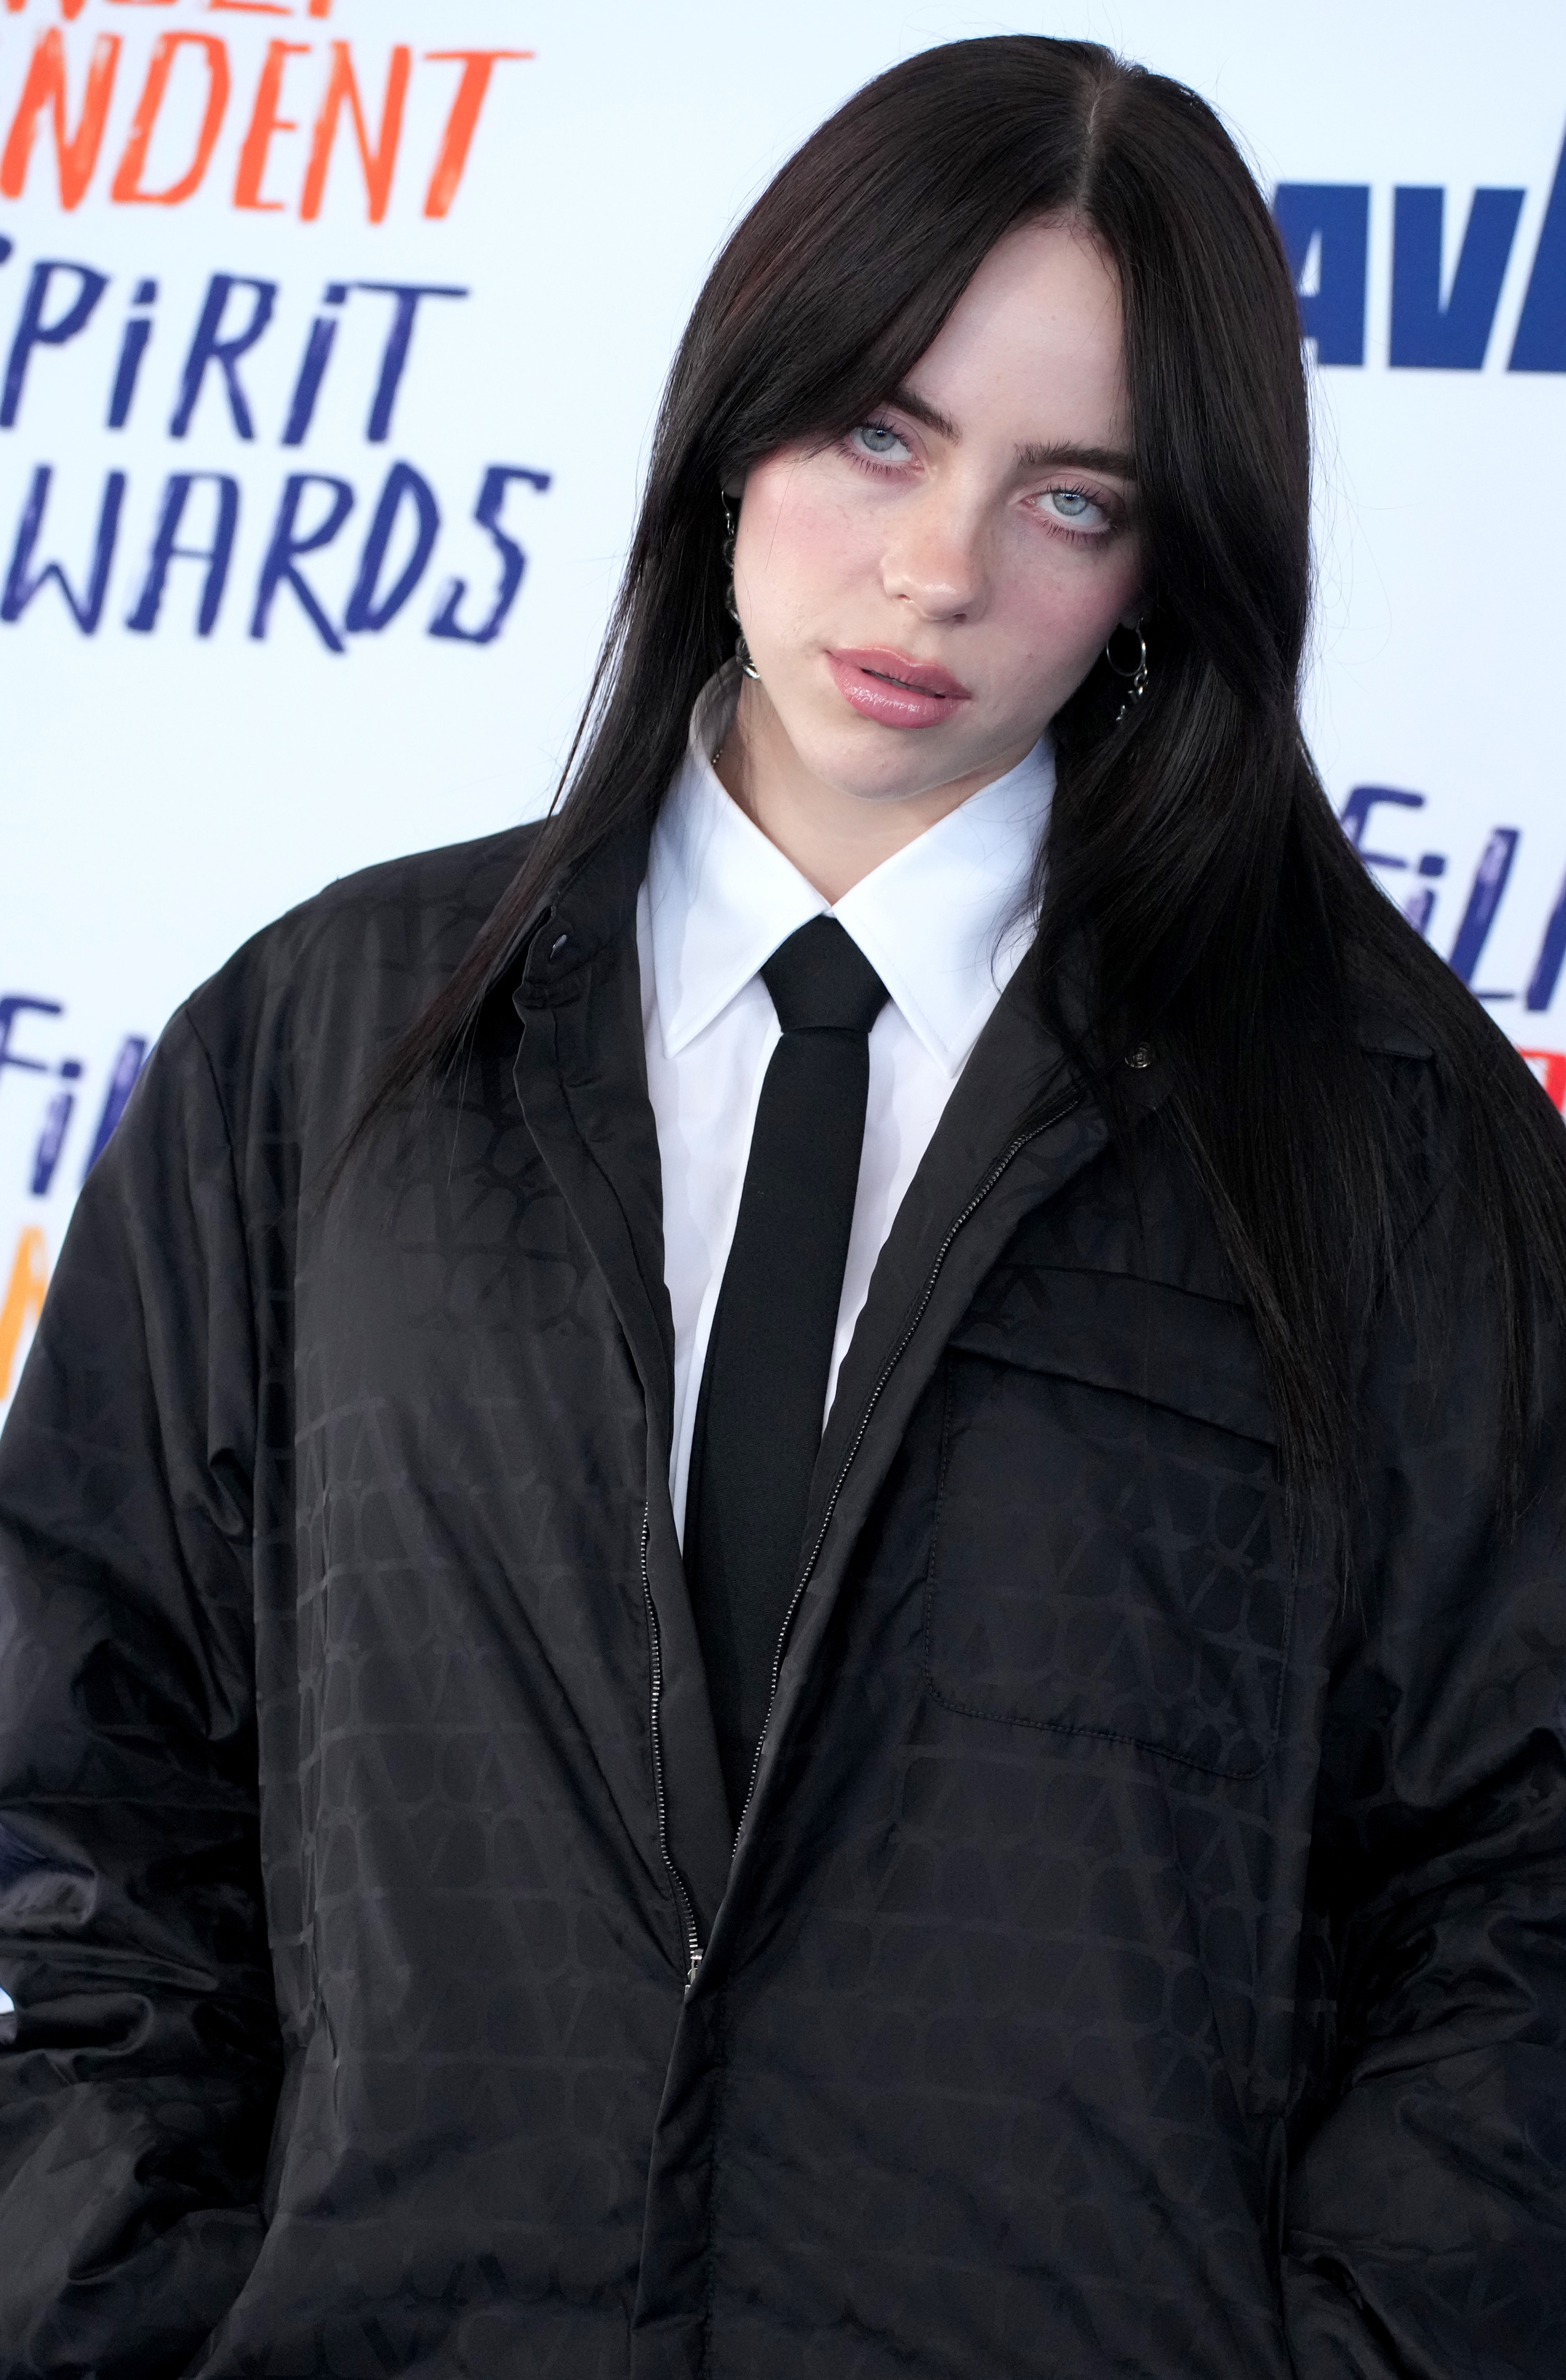 Billie Eilish wearing an oversized patterned jacket and tie at an award event